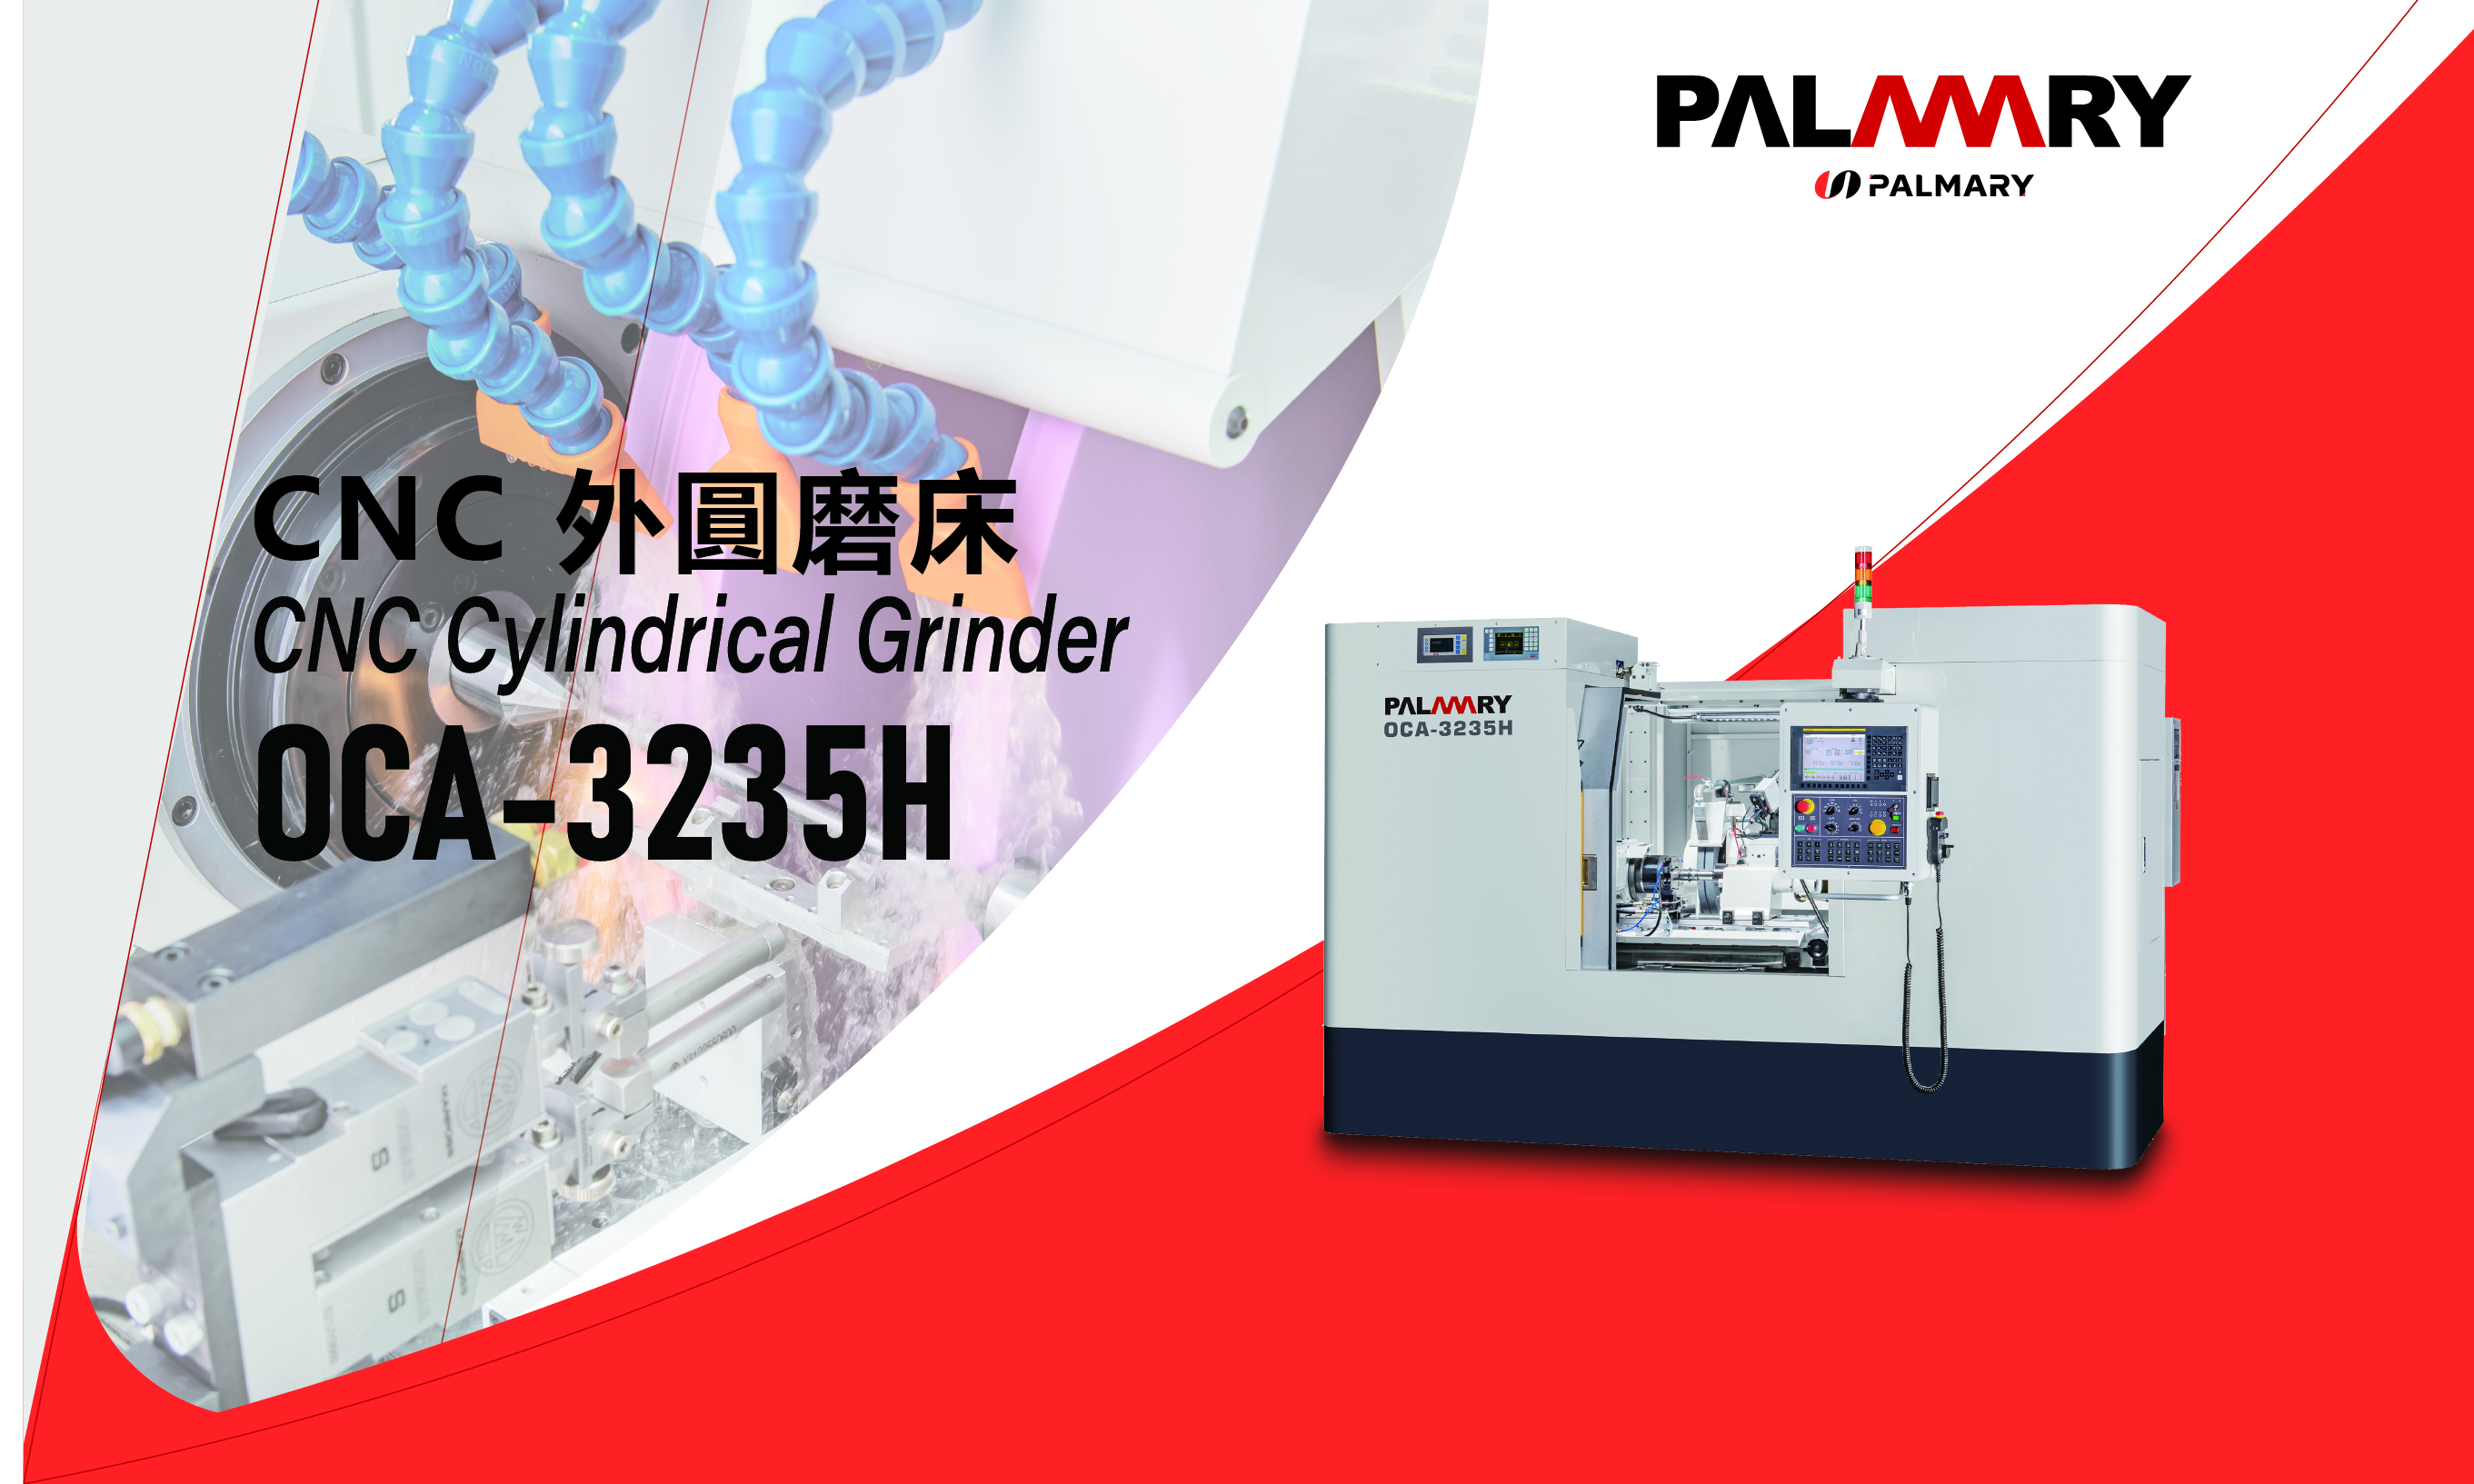 Catalog|PALMARY|CNC Cylindrical Grinder- Plunge grinding with wpecial wider grinding wheel series